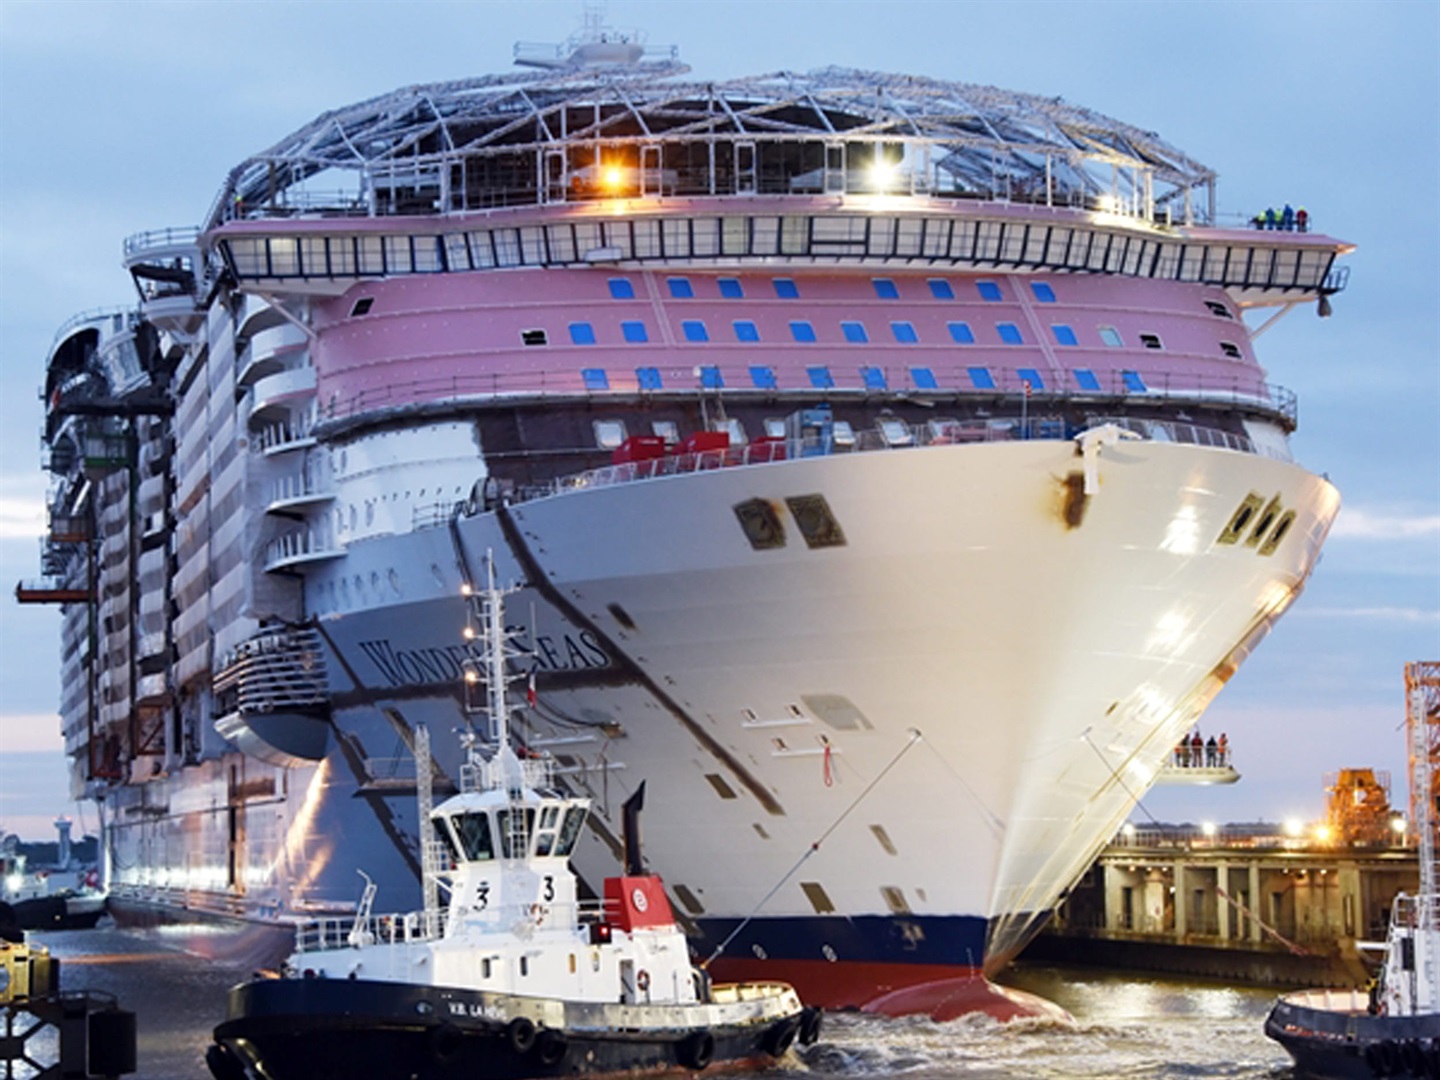 Royal Caribbean is building the new world's largest cruise ship despite